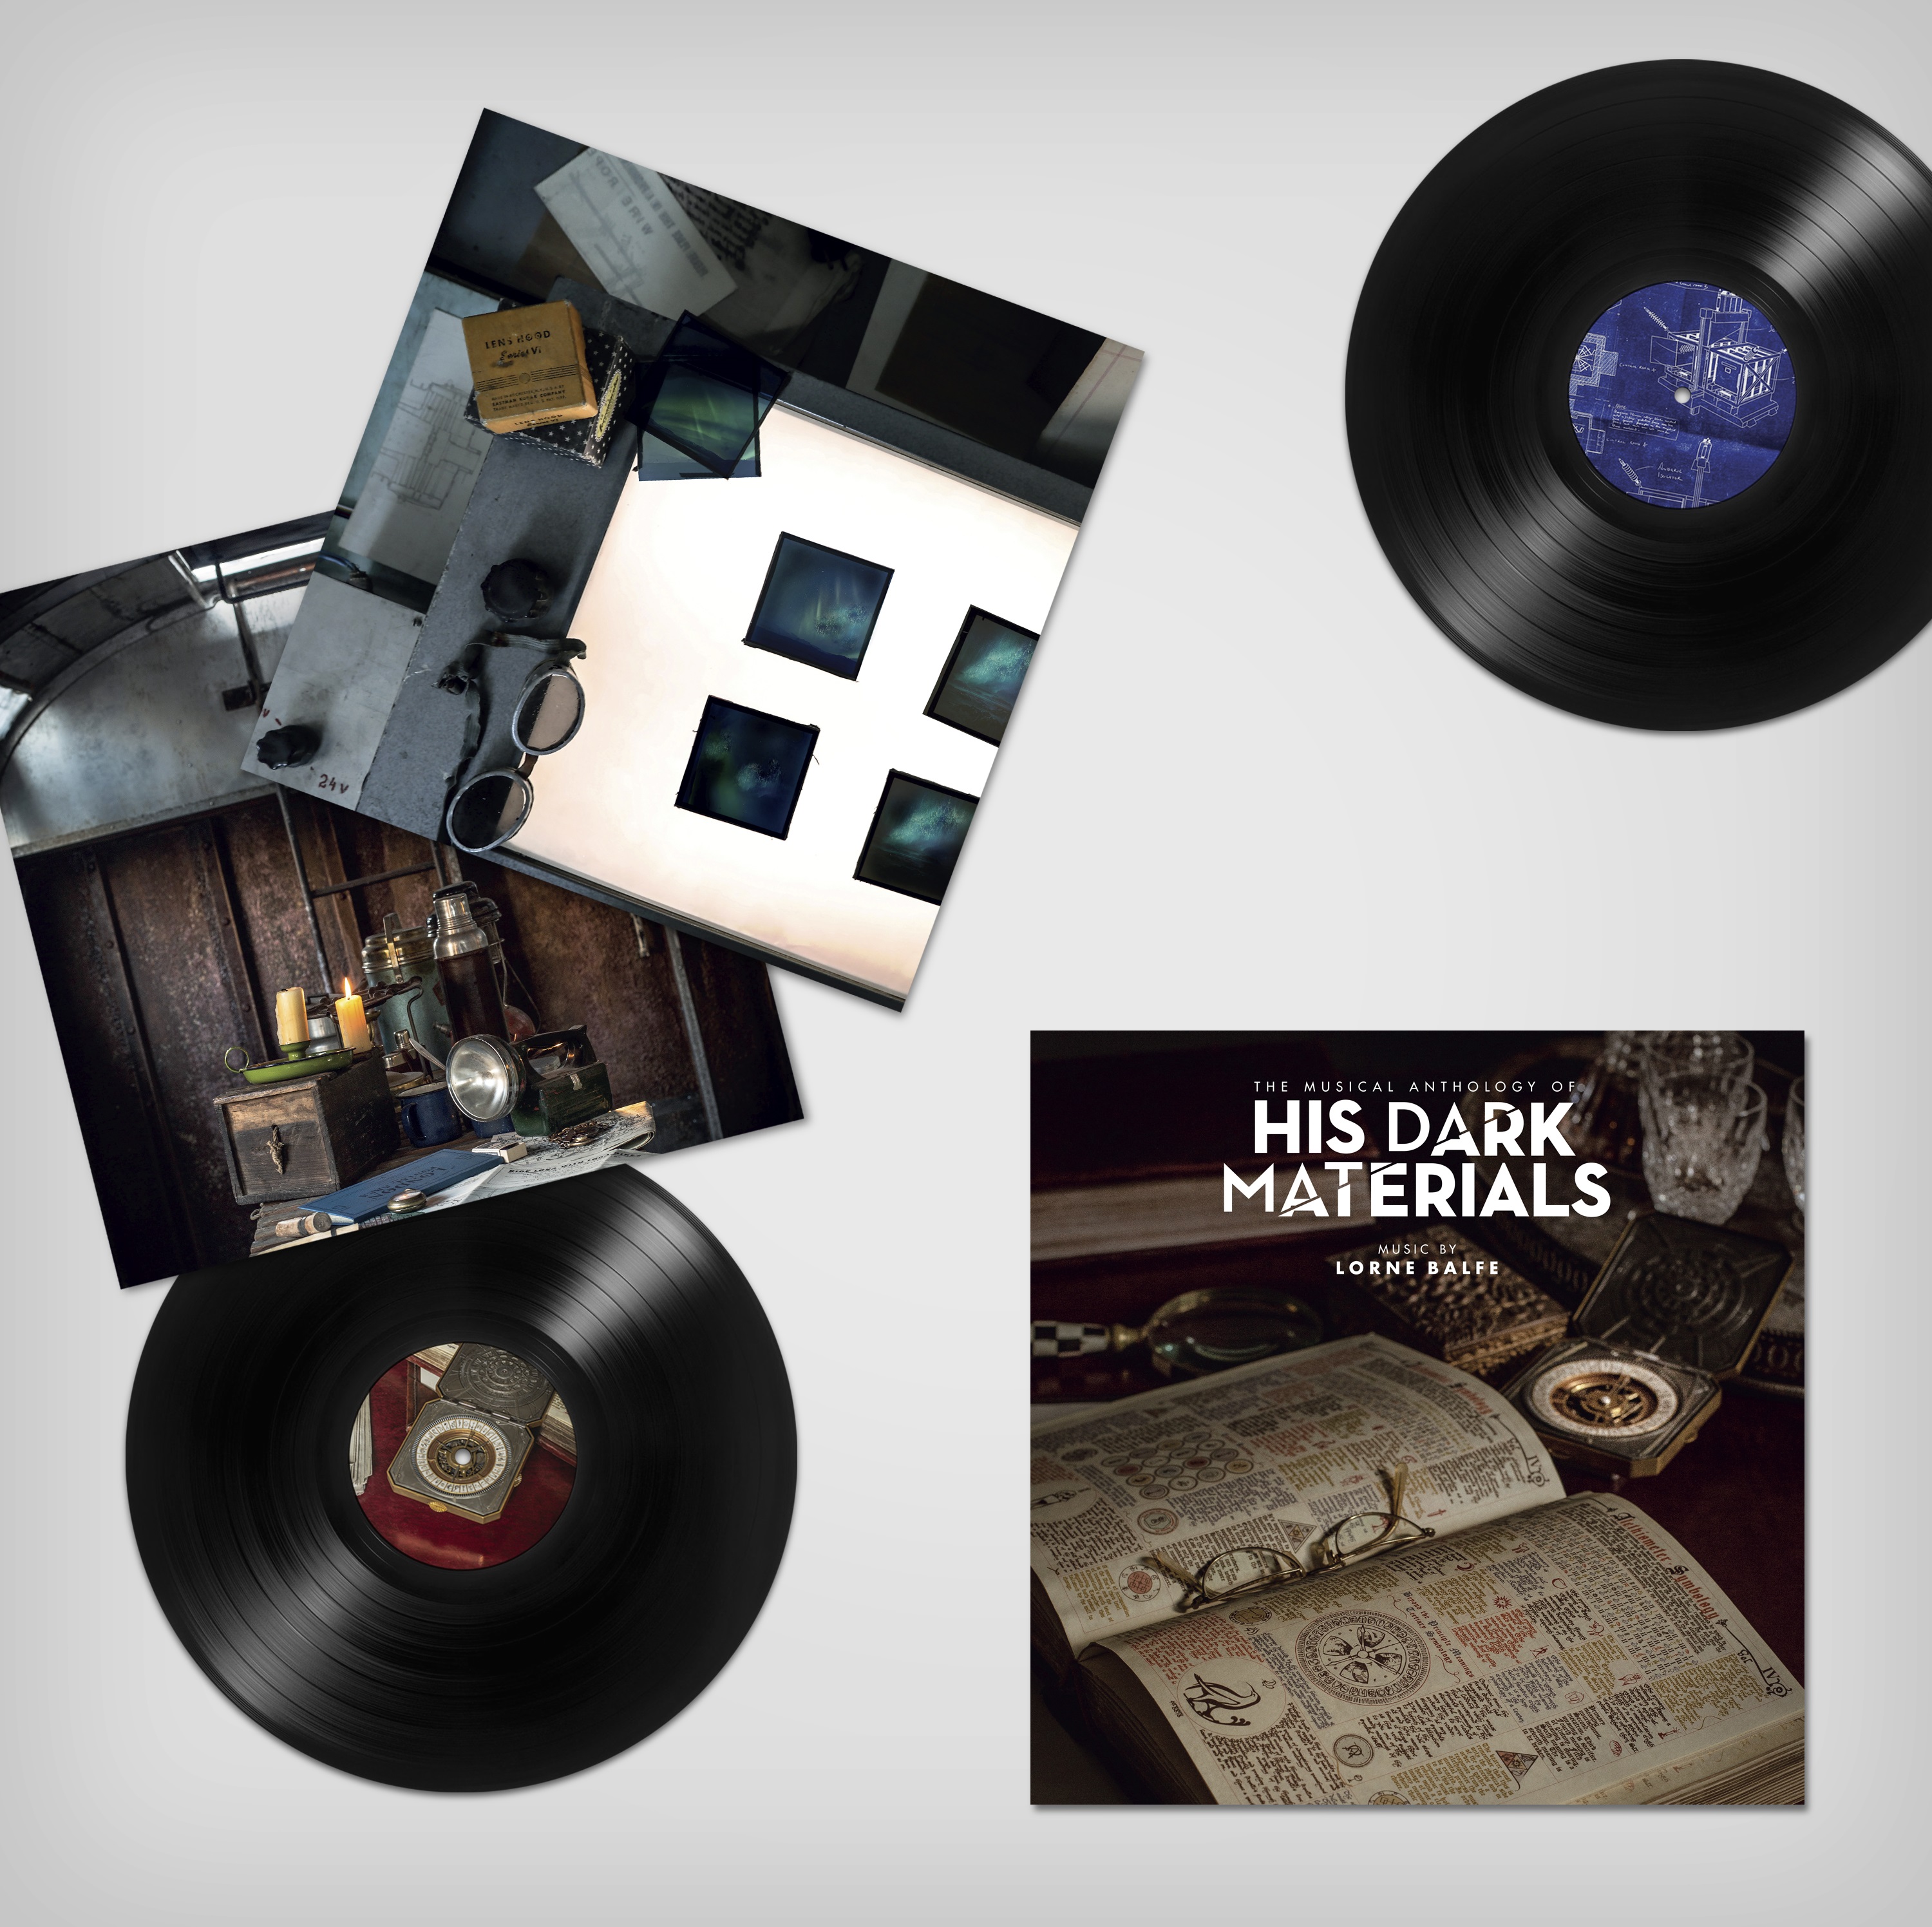 Record Store Day 2020: The Musical Anthology Of His Dark Materials